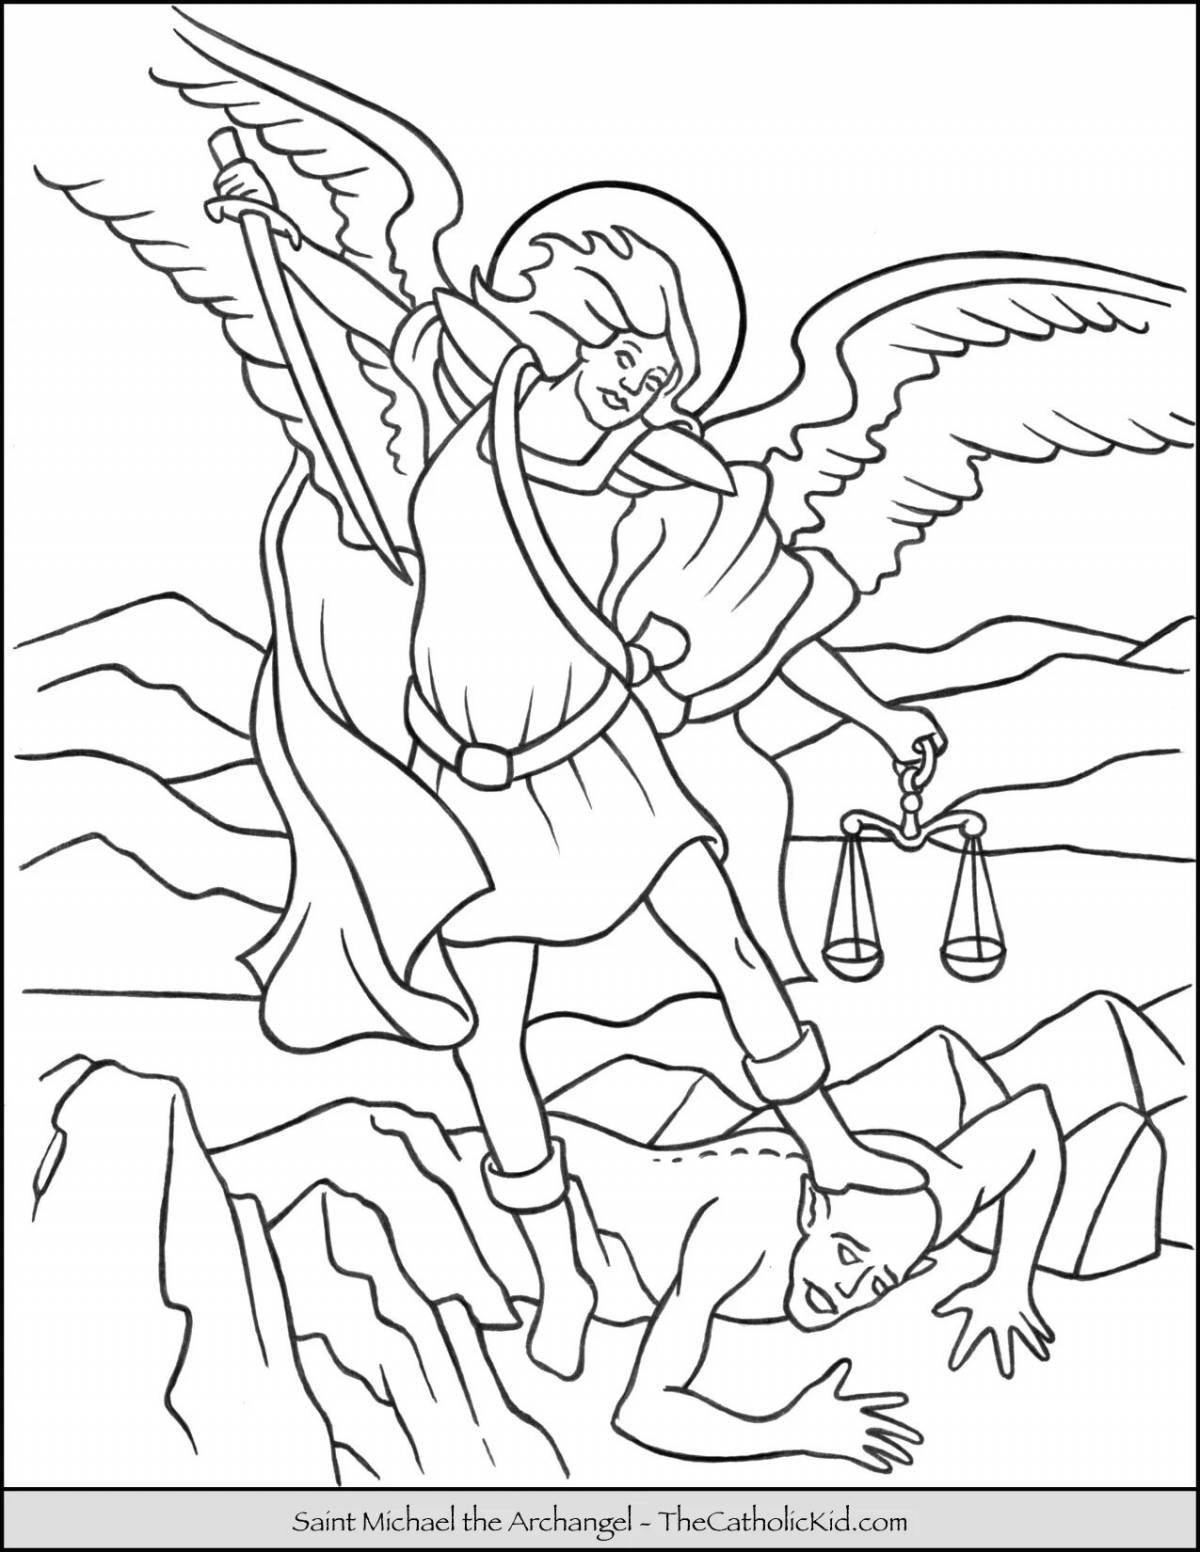 Coloring page of the divine archangel michael